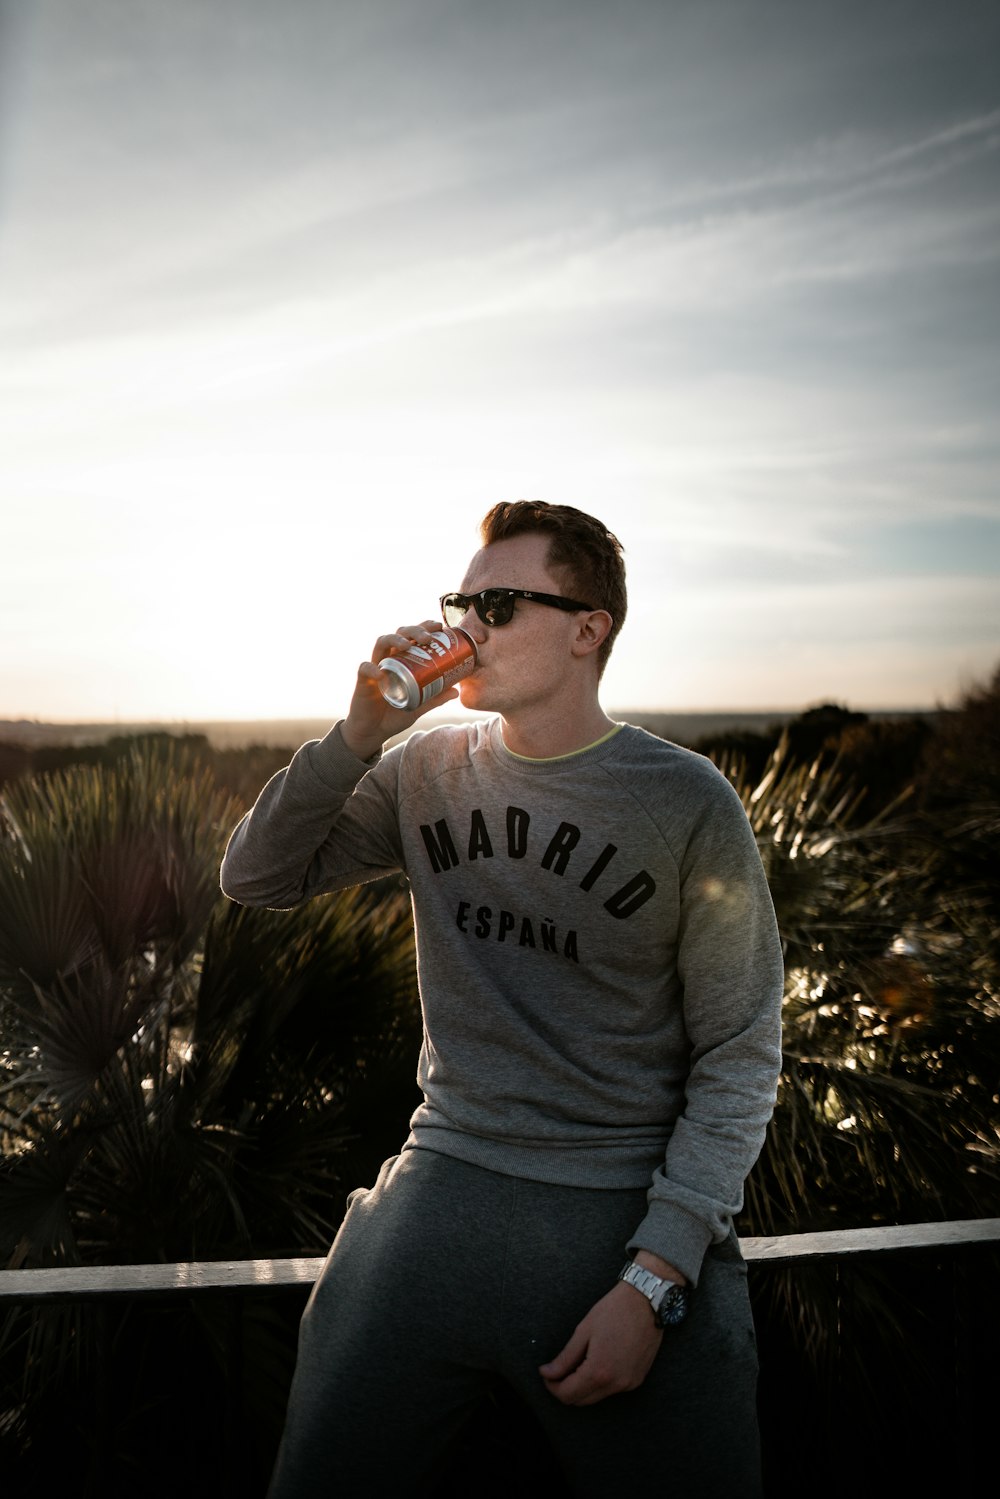 man in grey sweater drinking beverage on can while sitting on planter